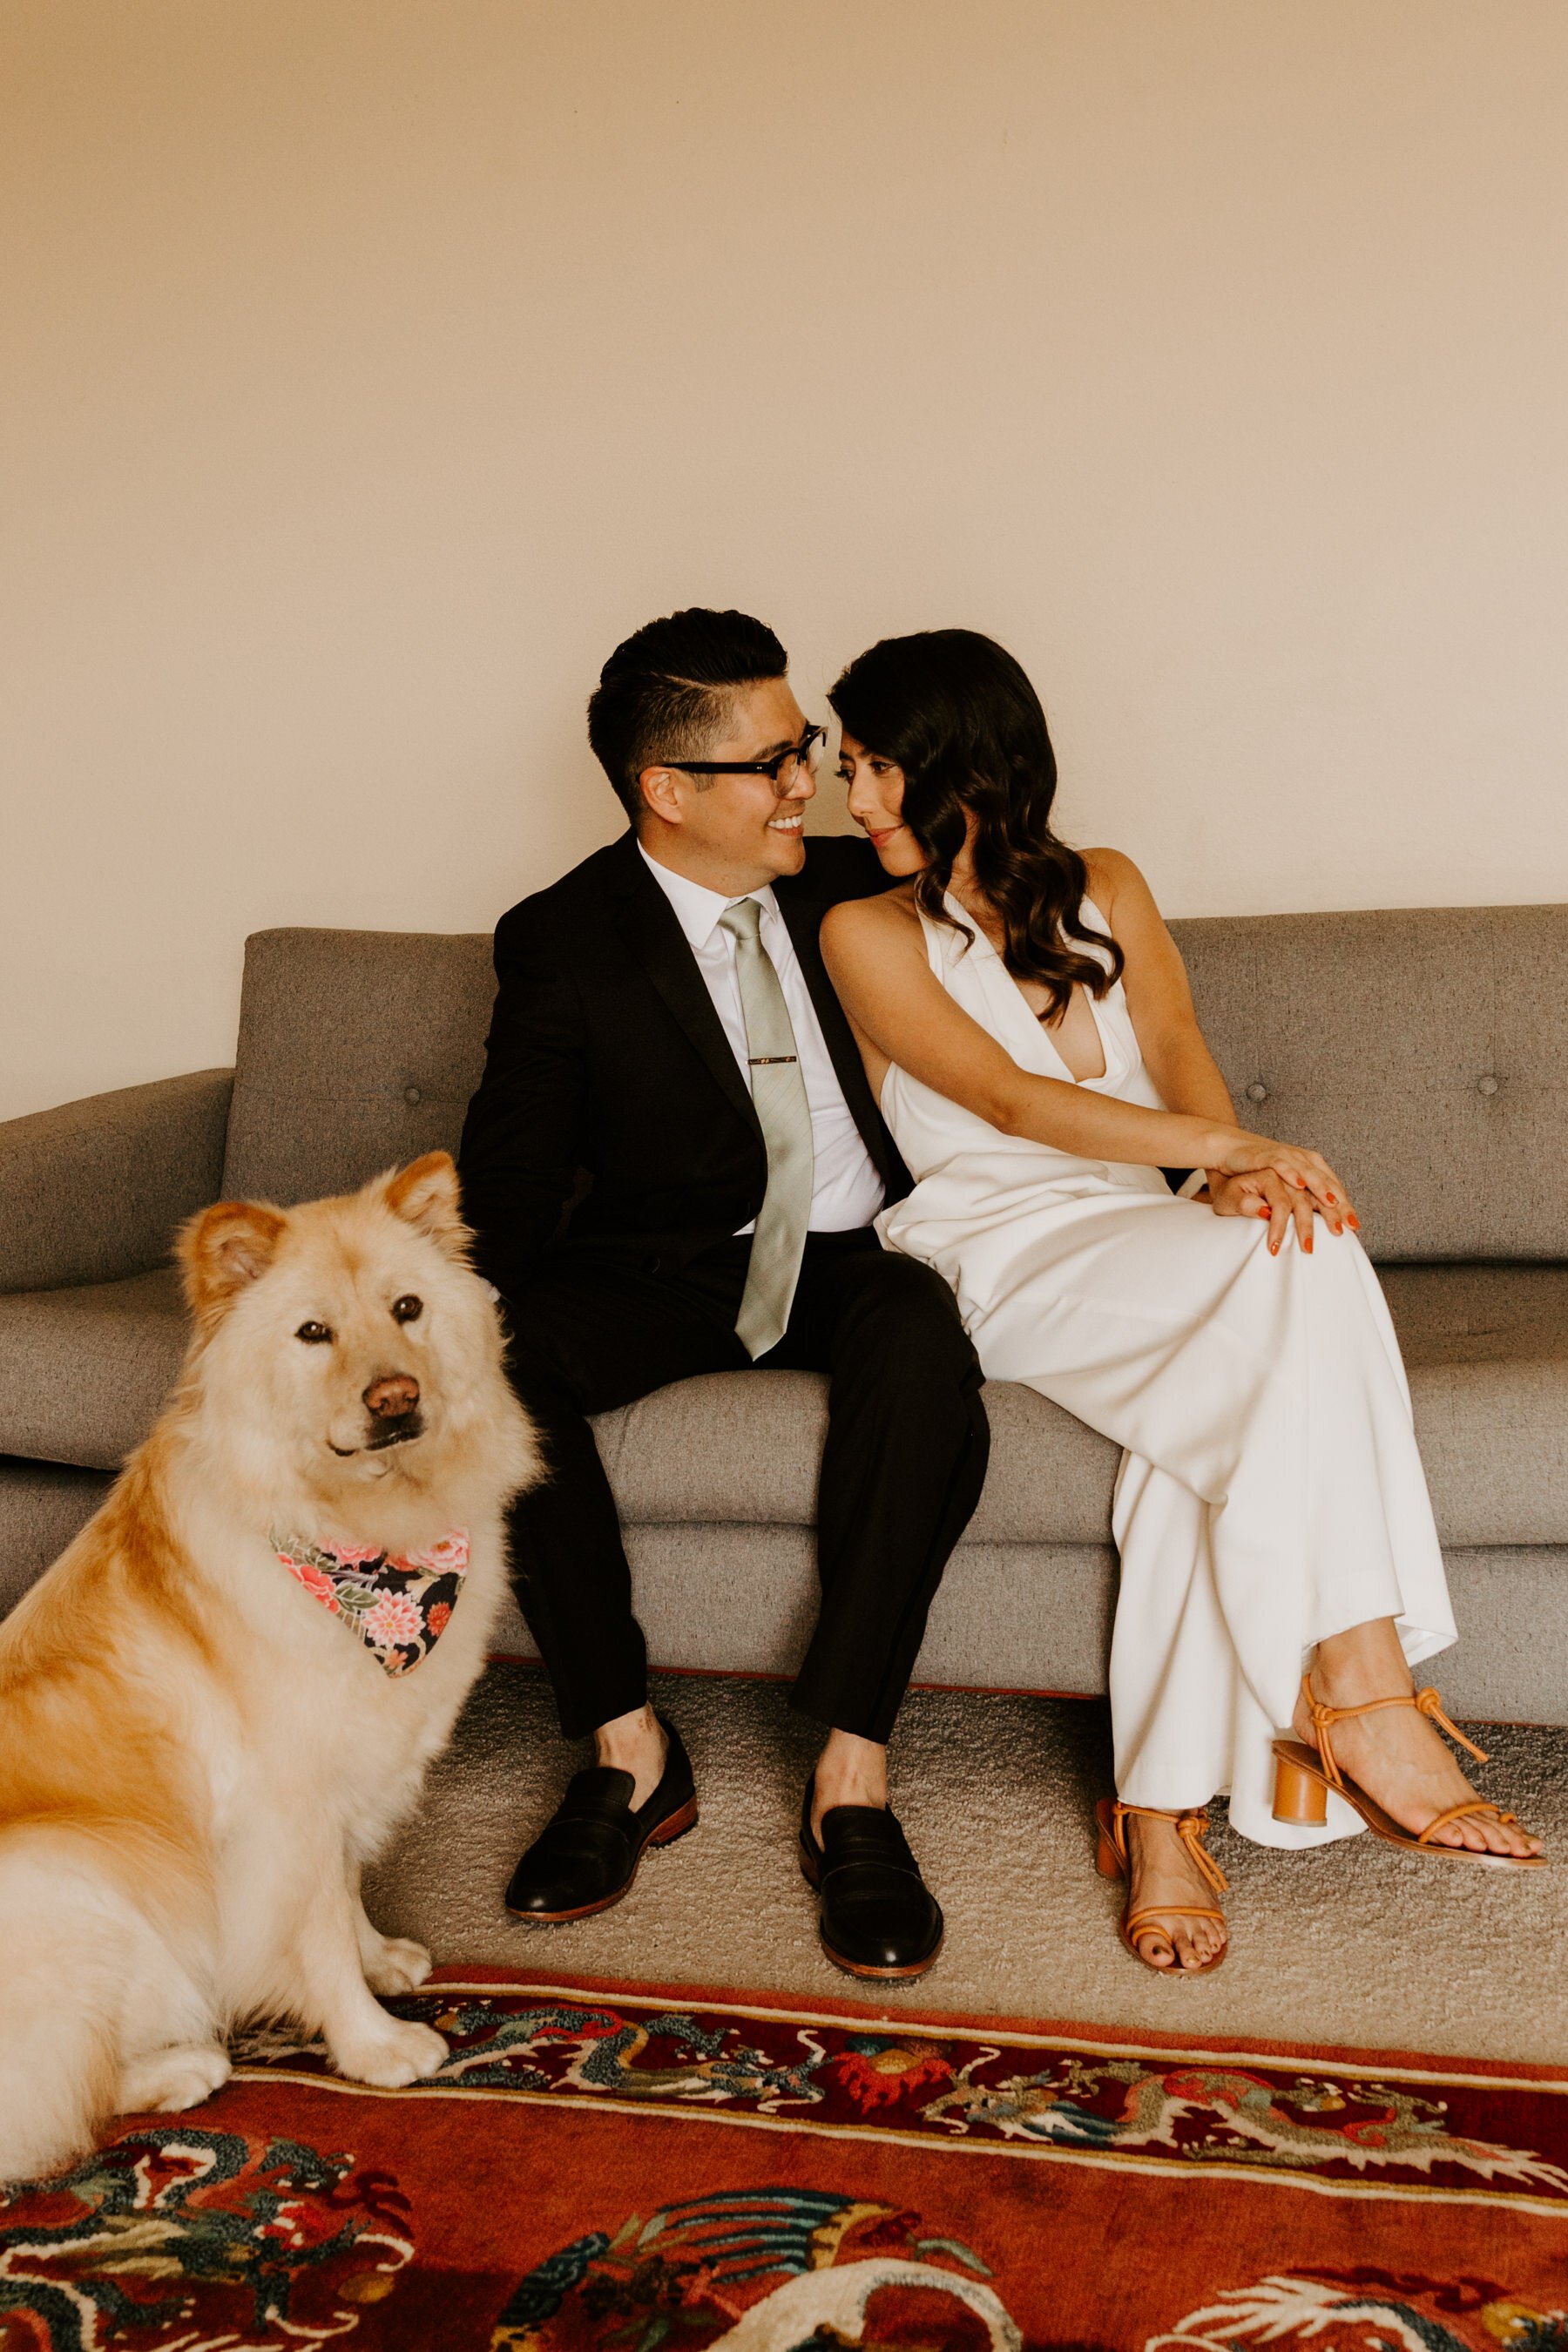 Bride and Groom photo with Dog on Couch | Photo by Tida Svy | www.tidasvy.com | Los Angeles Wedding Photographer